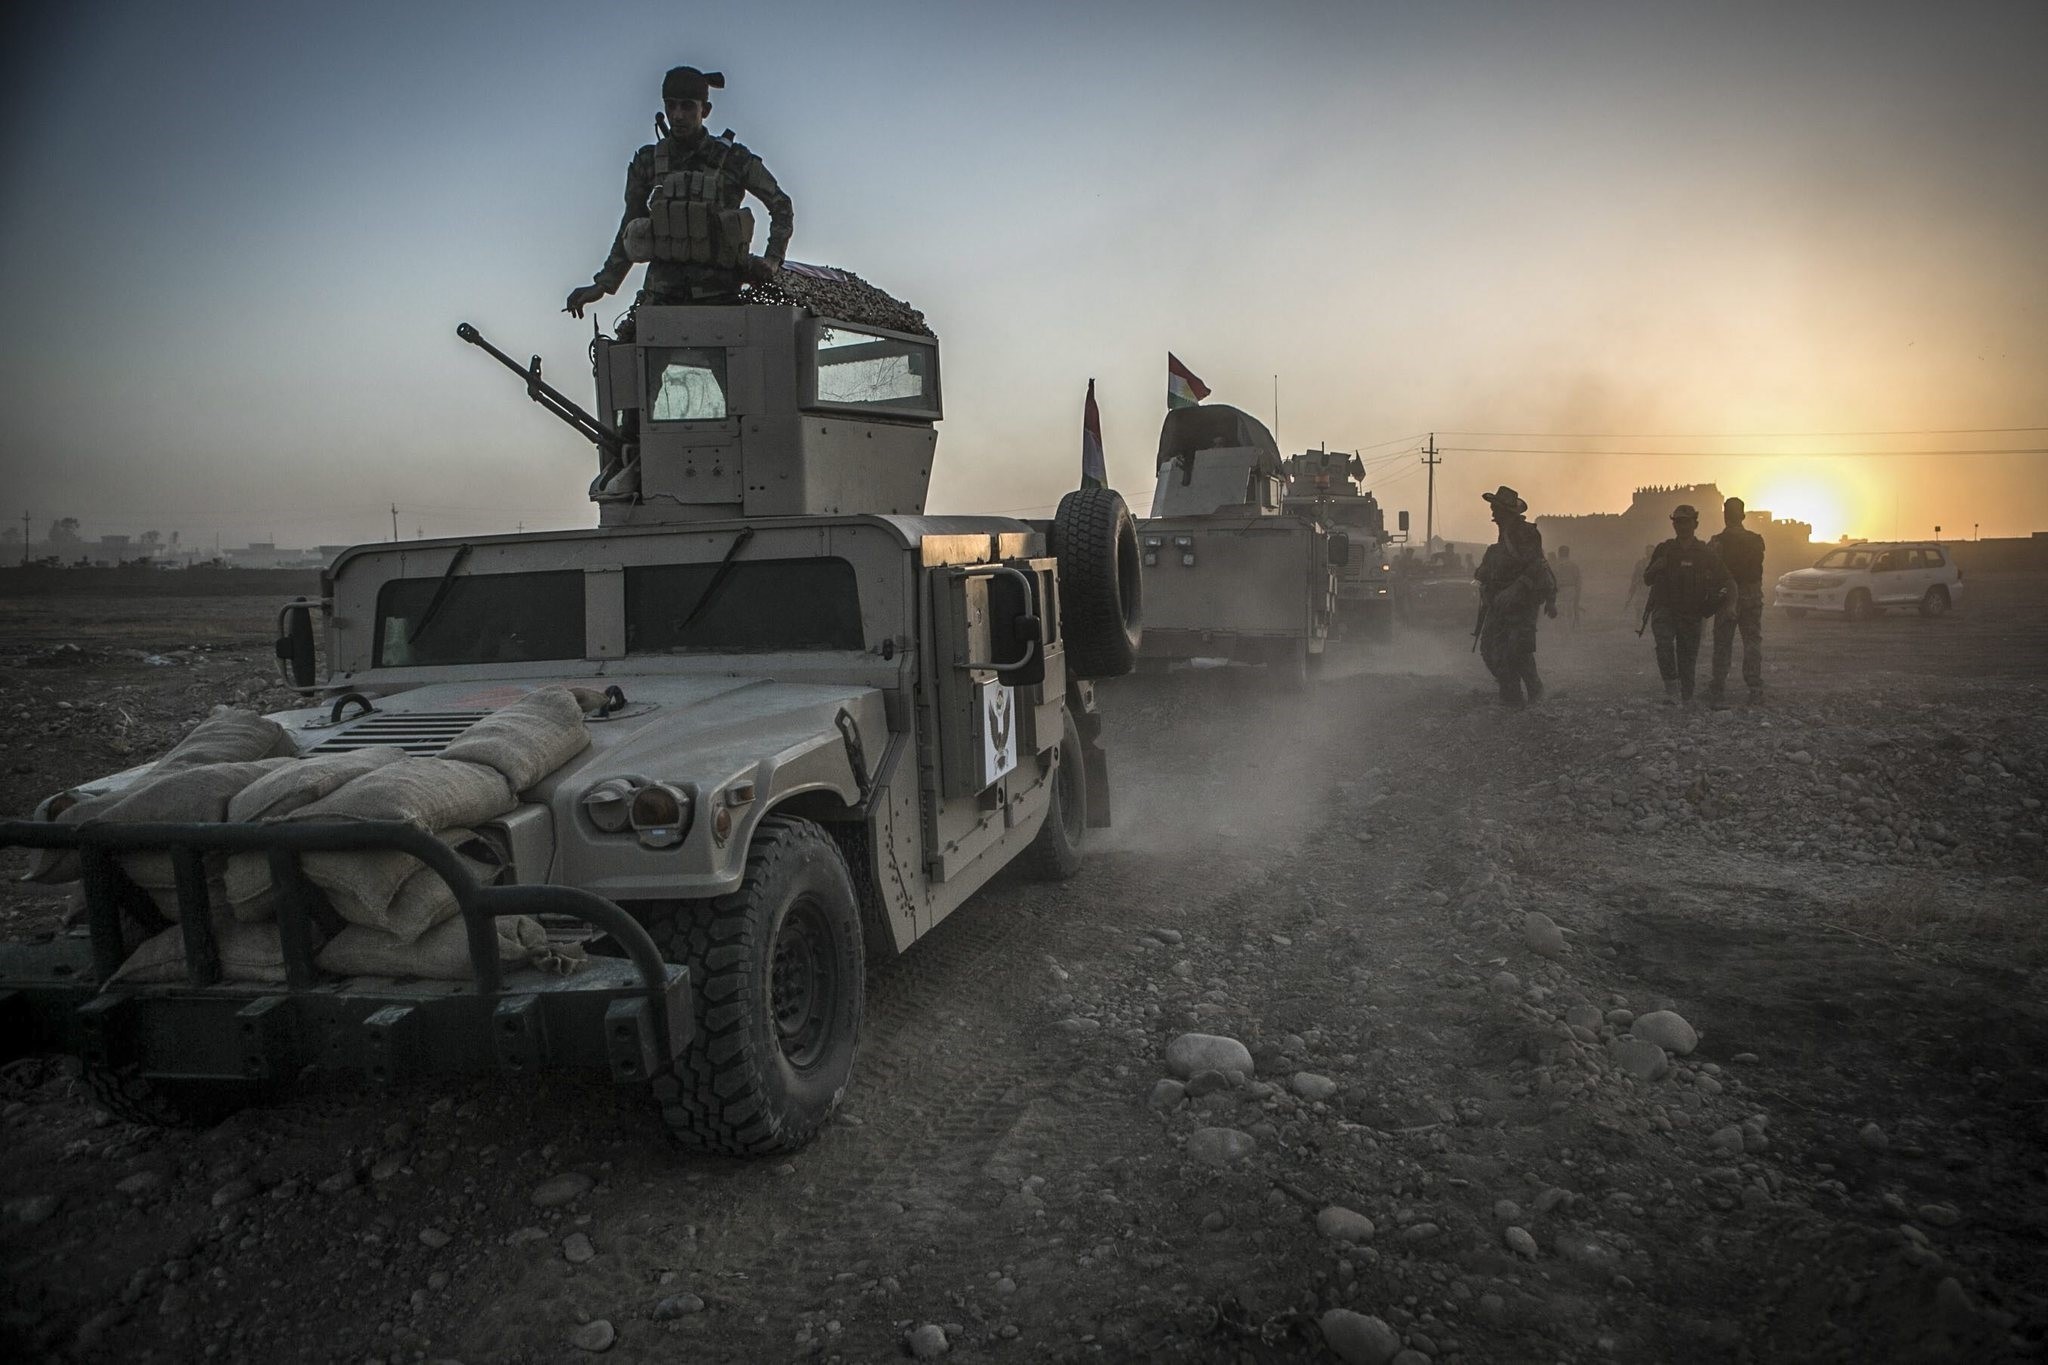 Peshmerga forces leave a base as they take part in an operation to liberate several villages currently under the control of the Islamic State southeast of Mosul, north Iraq, 14 August 2016. (EPA Photo)